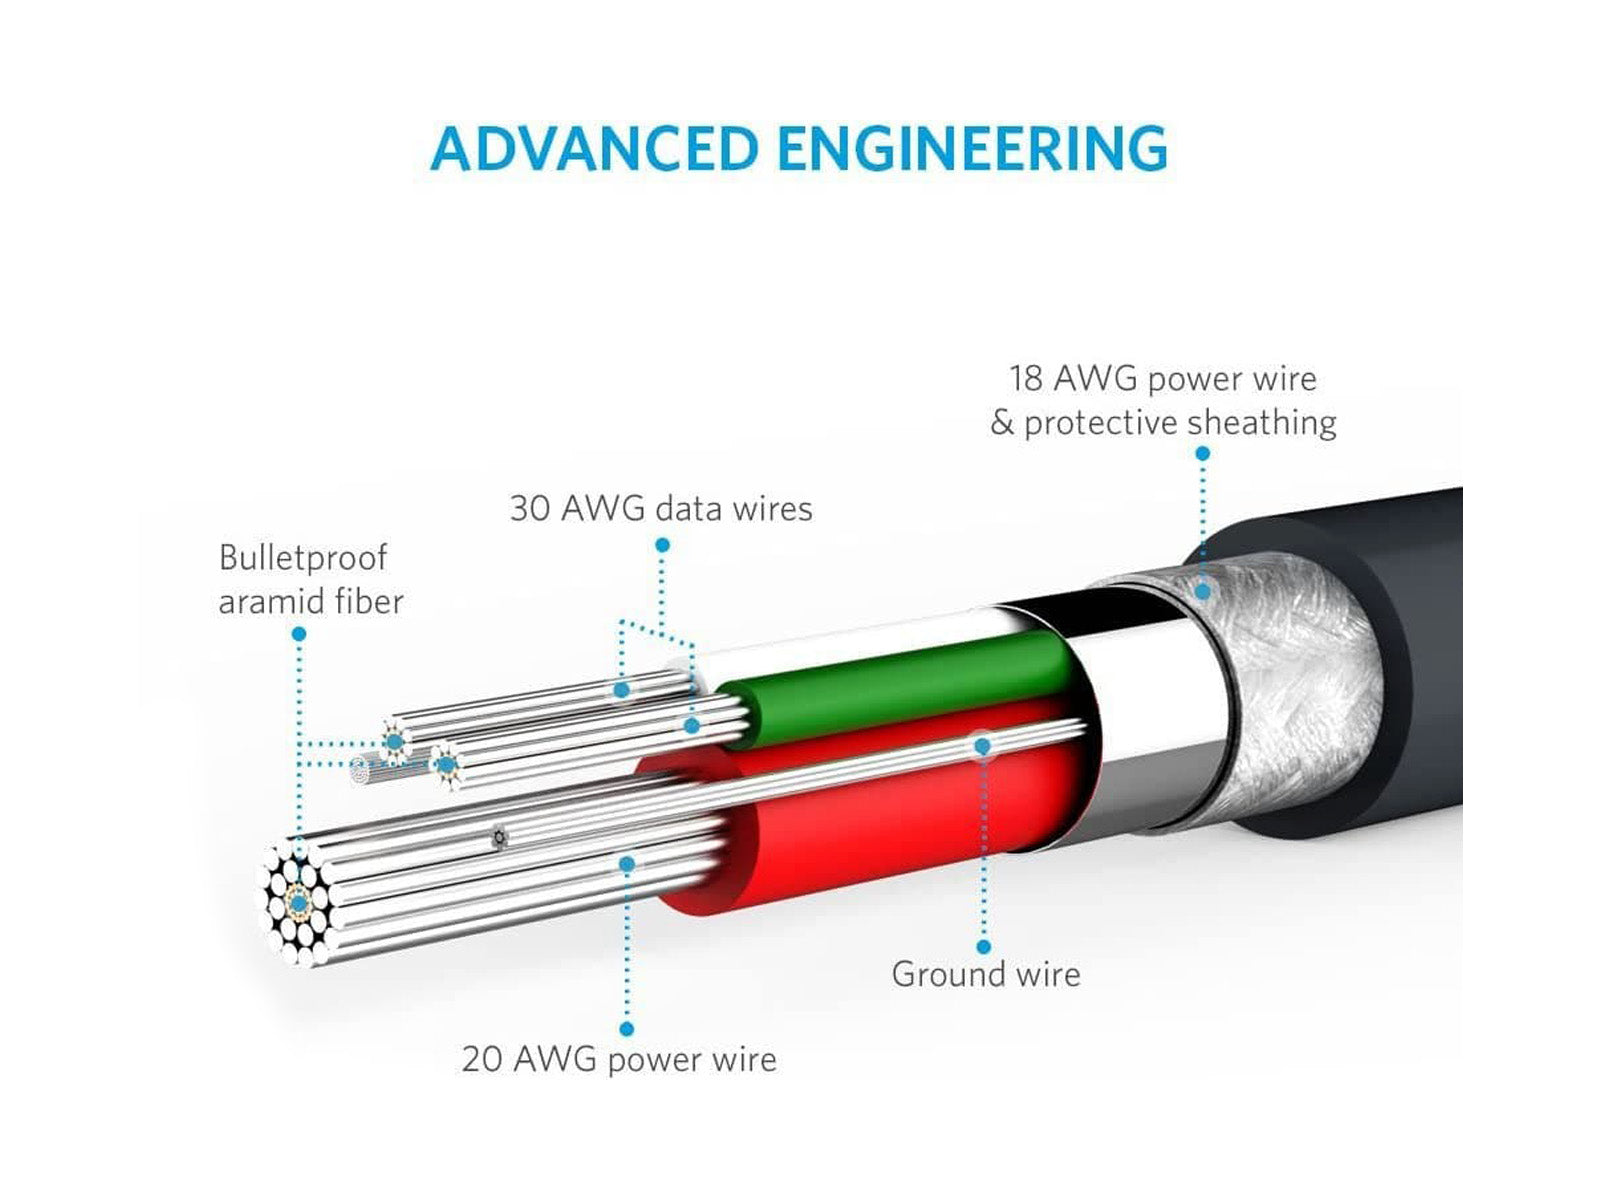 Image explains the advanced engineering of the  PowerLine Select Micro USB High-Speed Charging Cable